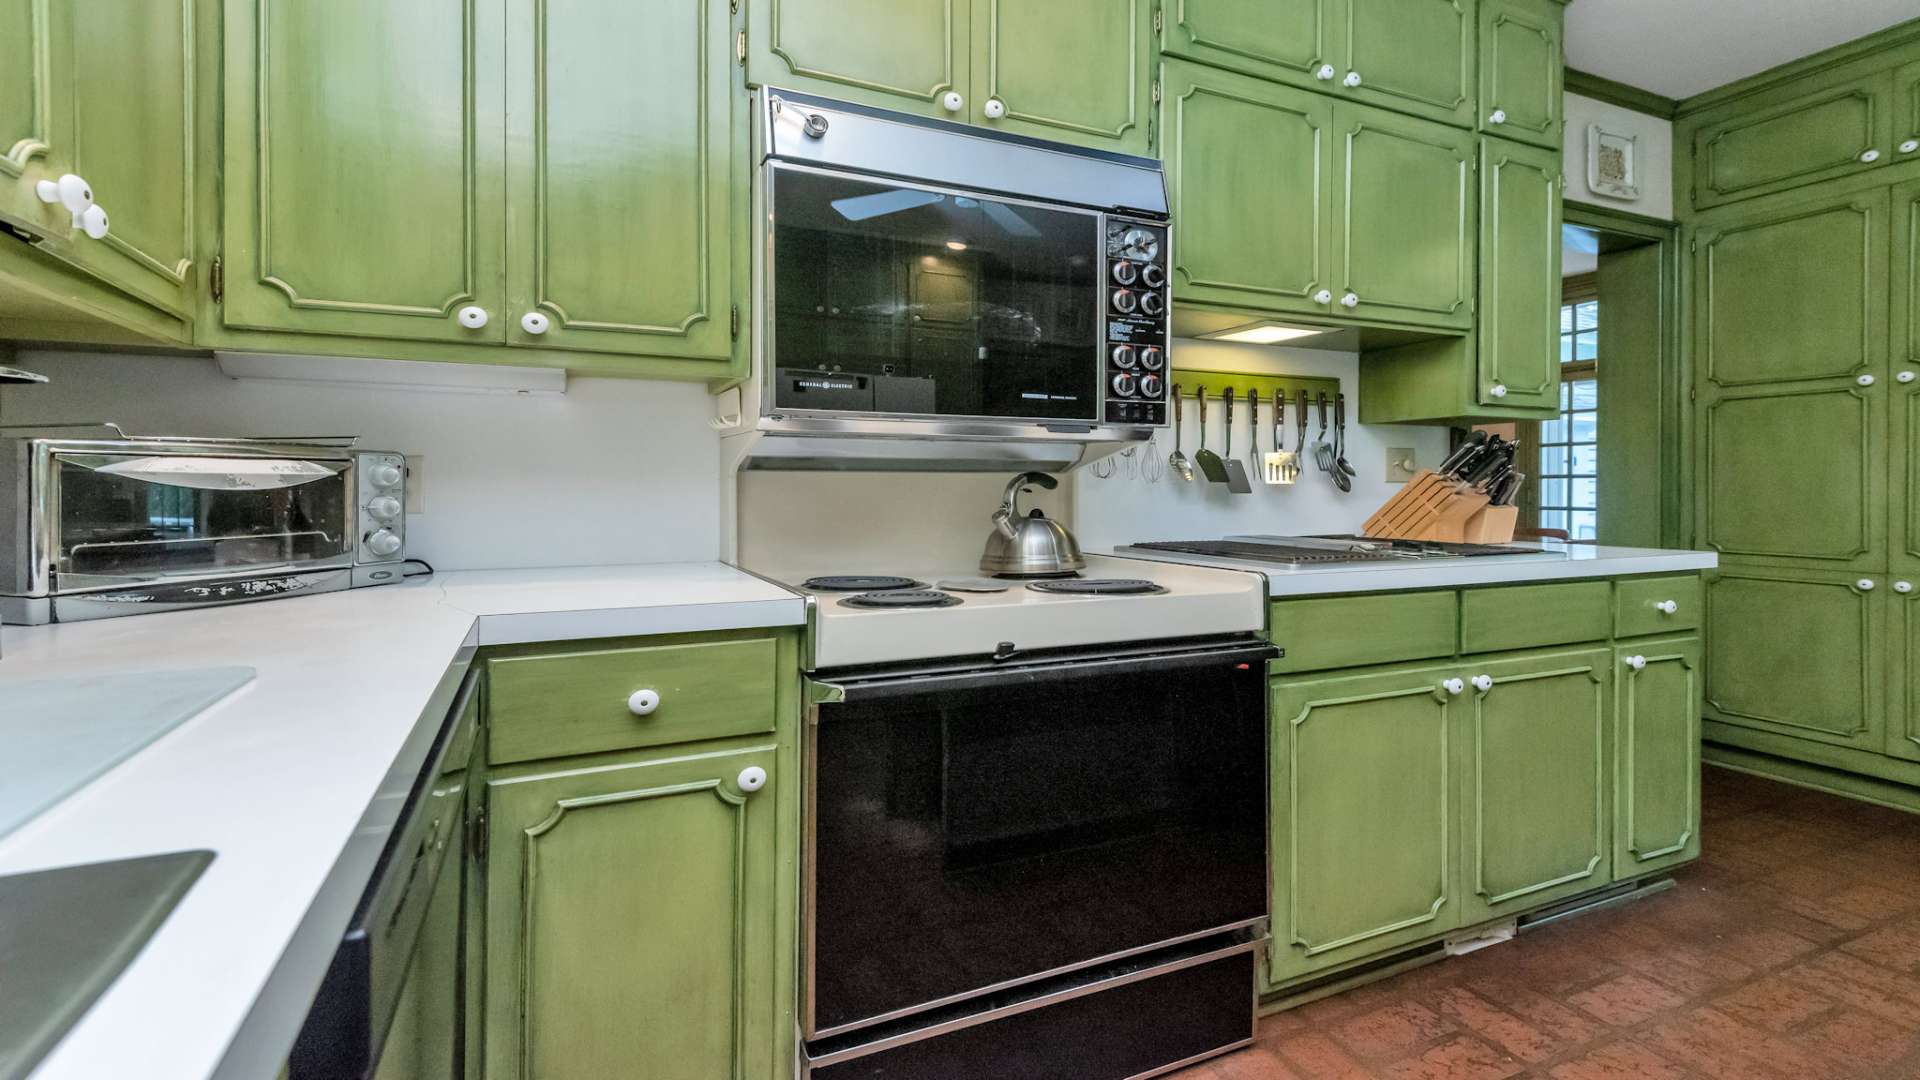 Appliances include a refrigerator, an electric range with double ovens, a downdraft cooktop, and dishwasher.